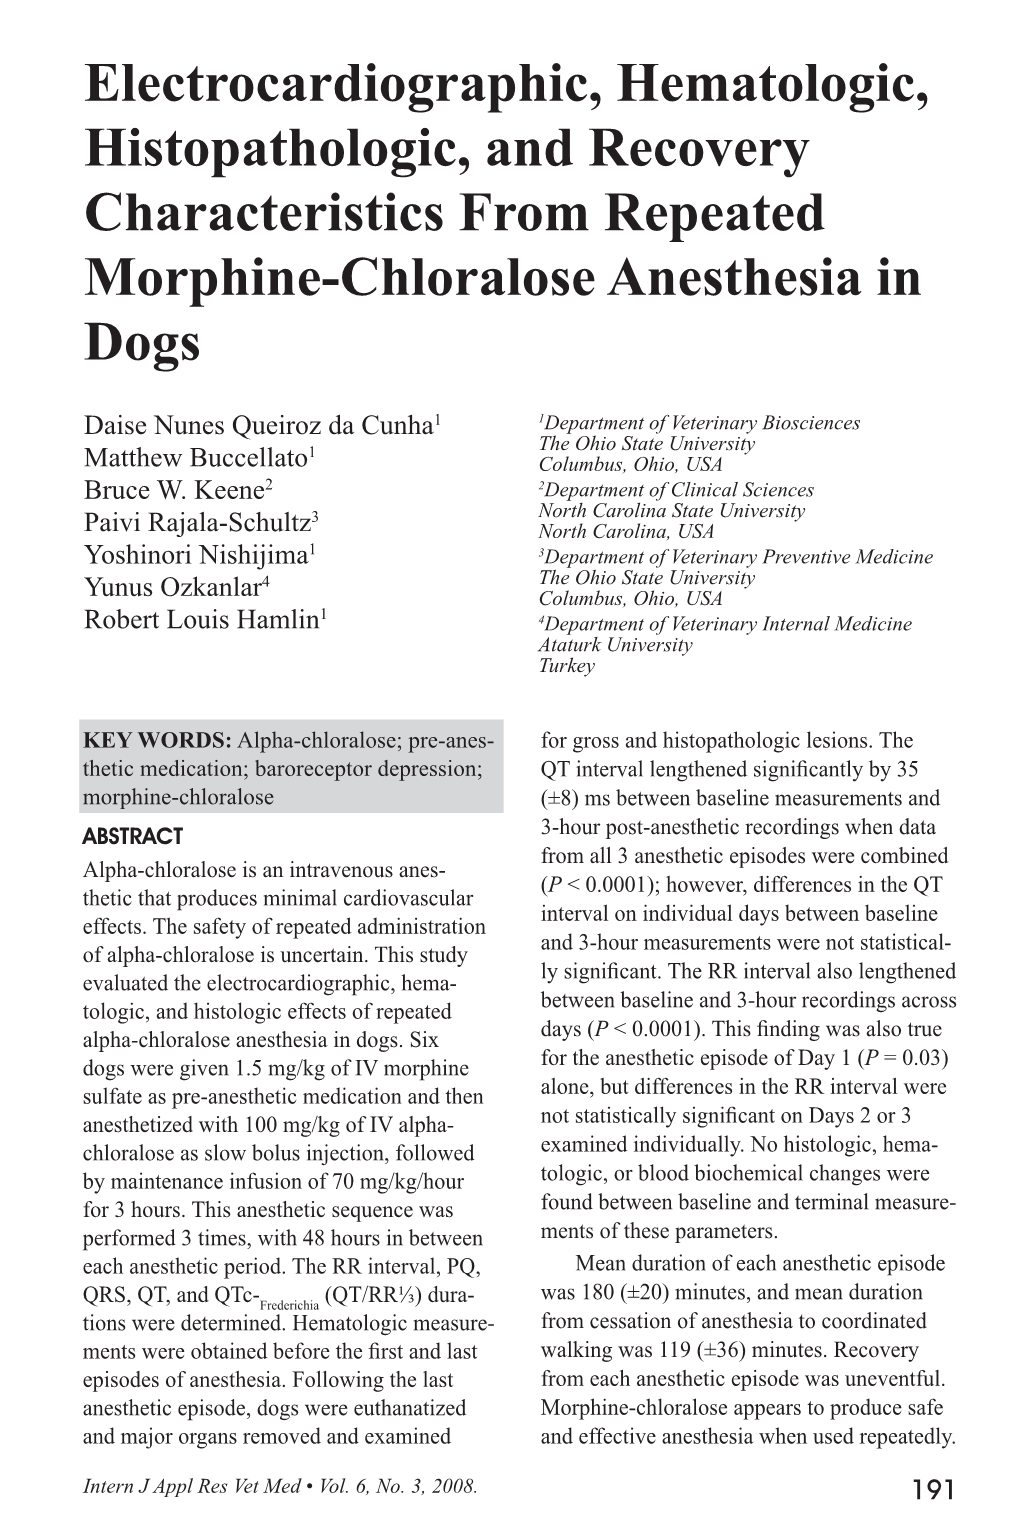 Electrocardiographic, Hematologic, Histopathologic, and Recovery Characteristics from Repeated Morphine-Chloralose Anesthesia in Dogs